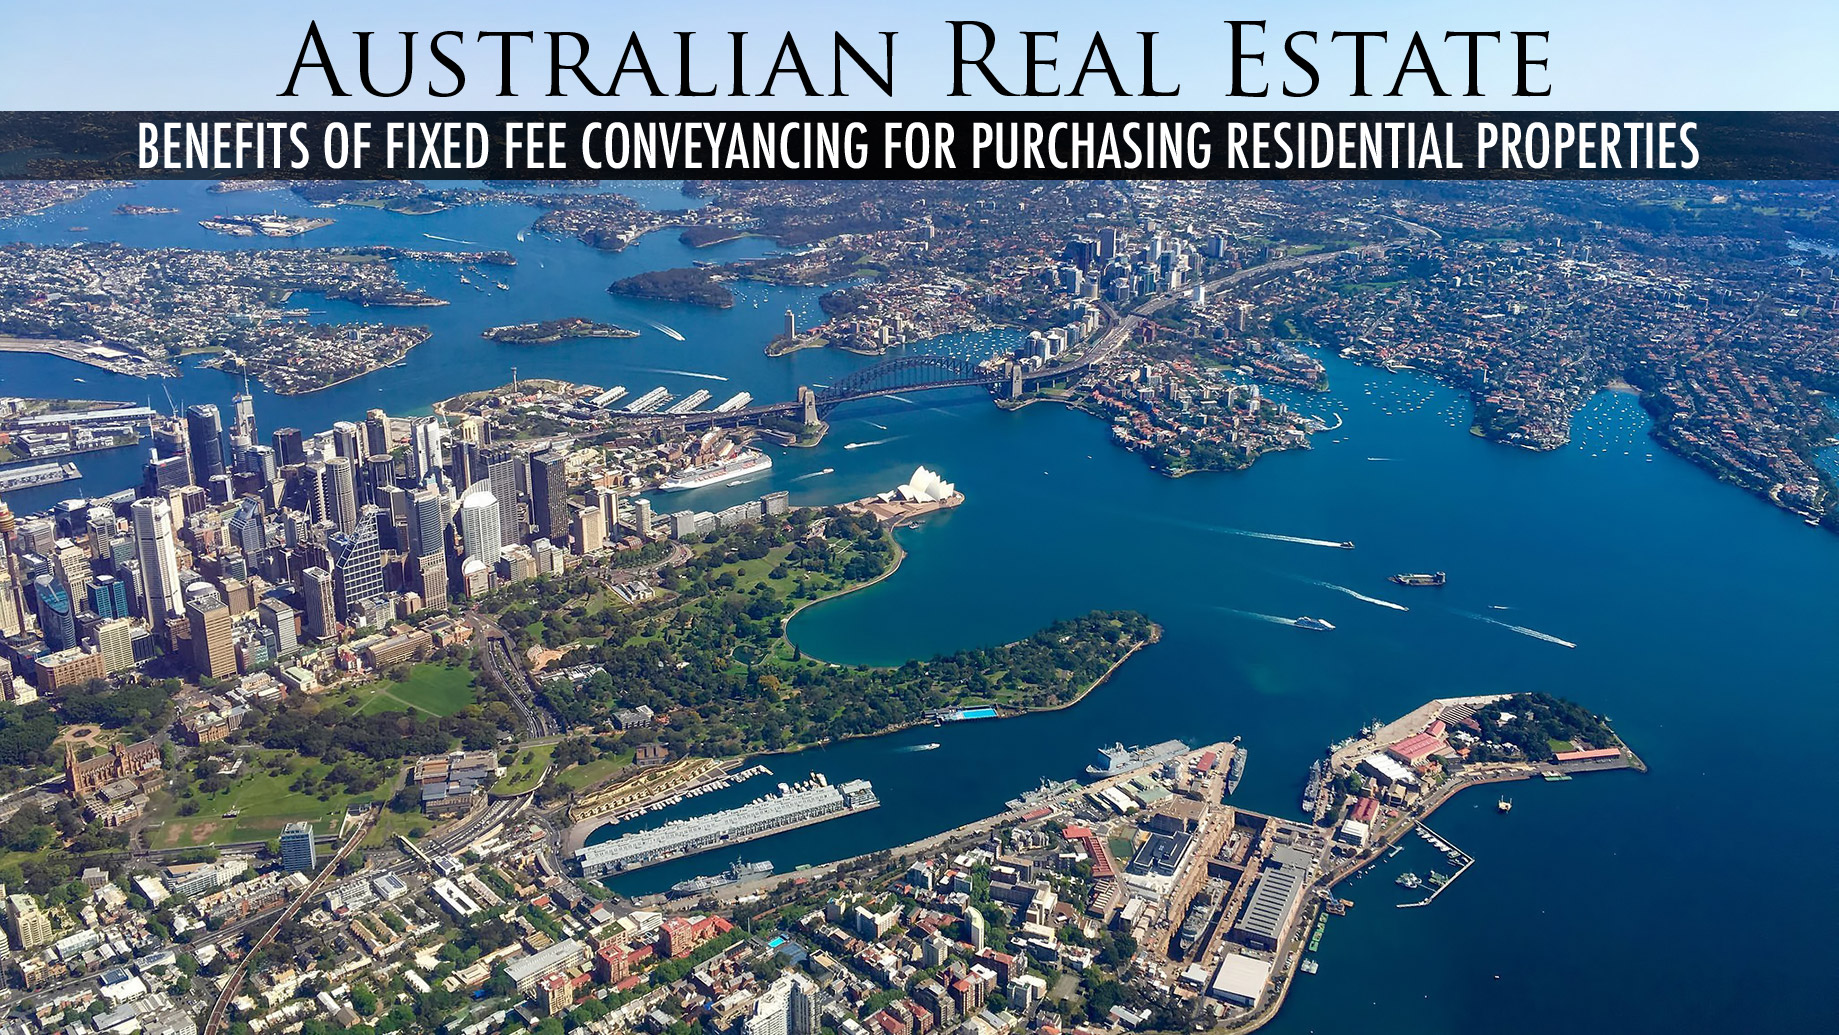 Australian Real Estate - Benefits of Fixed Fee Conveyancing for Purchasing Residential Properties